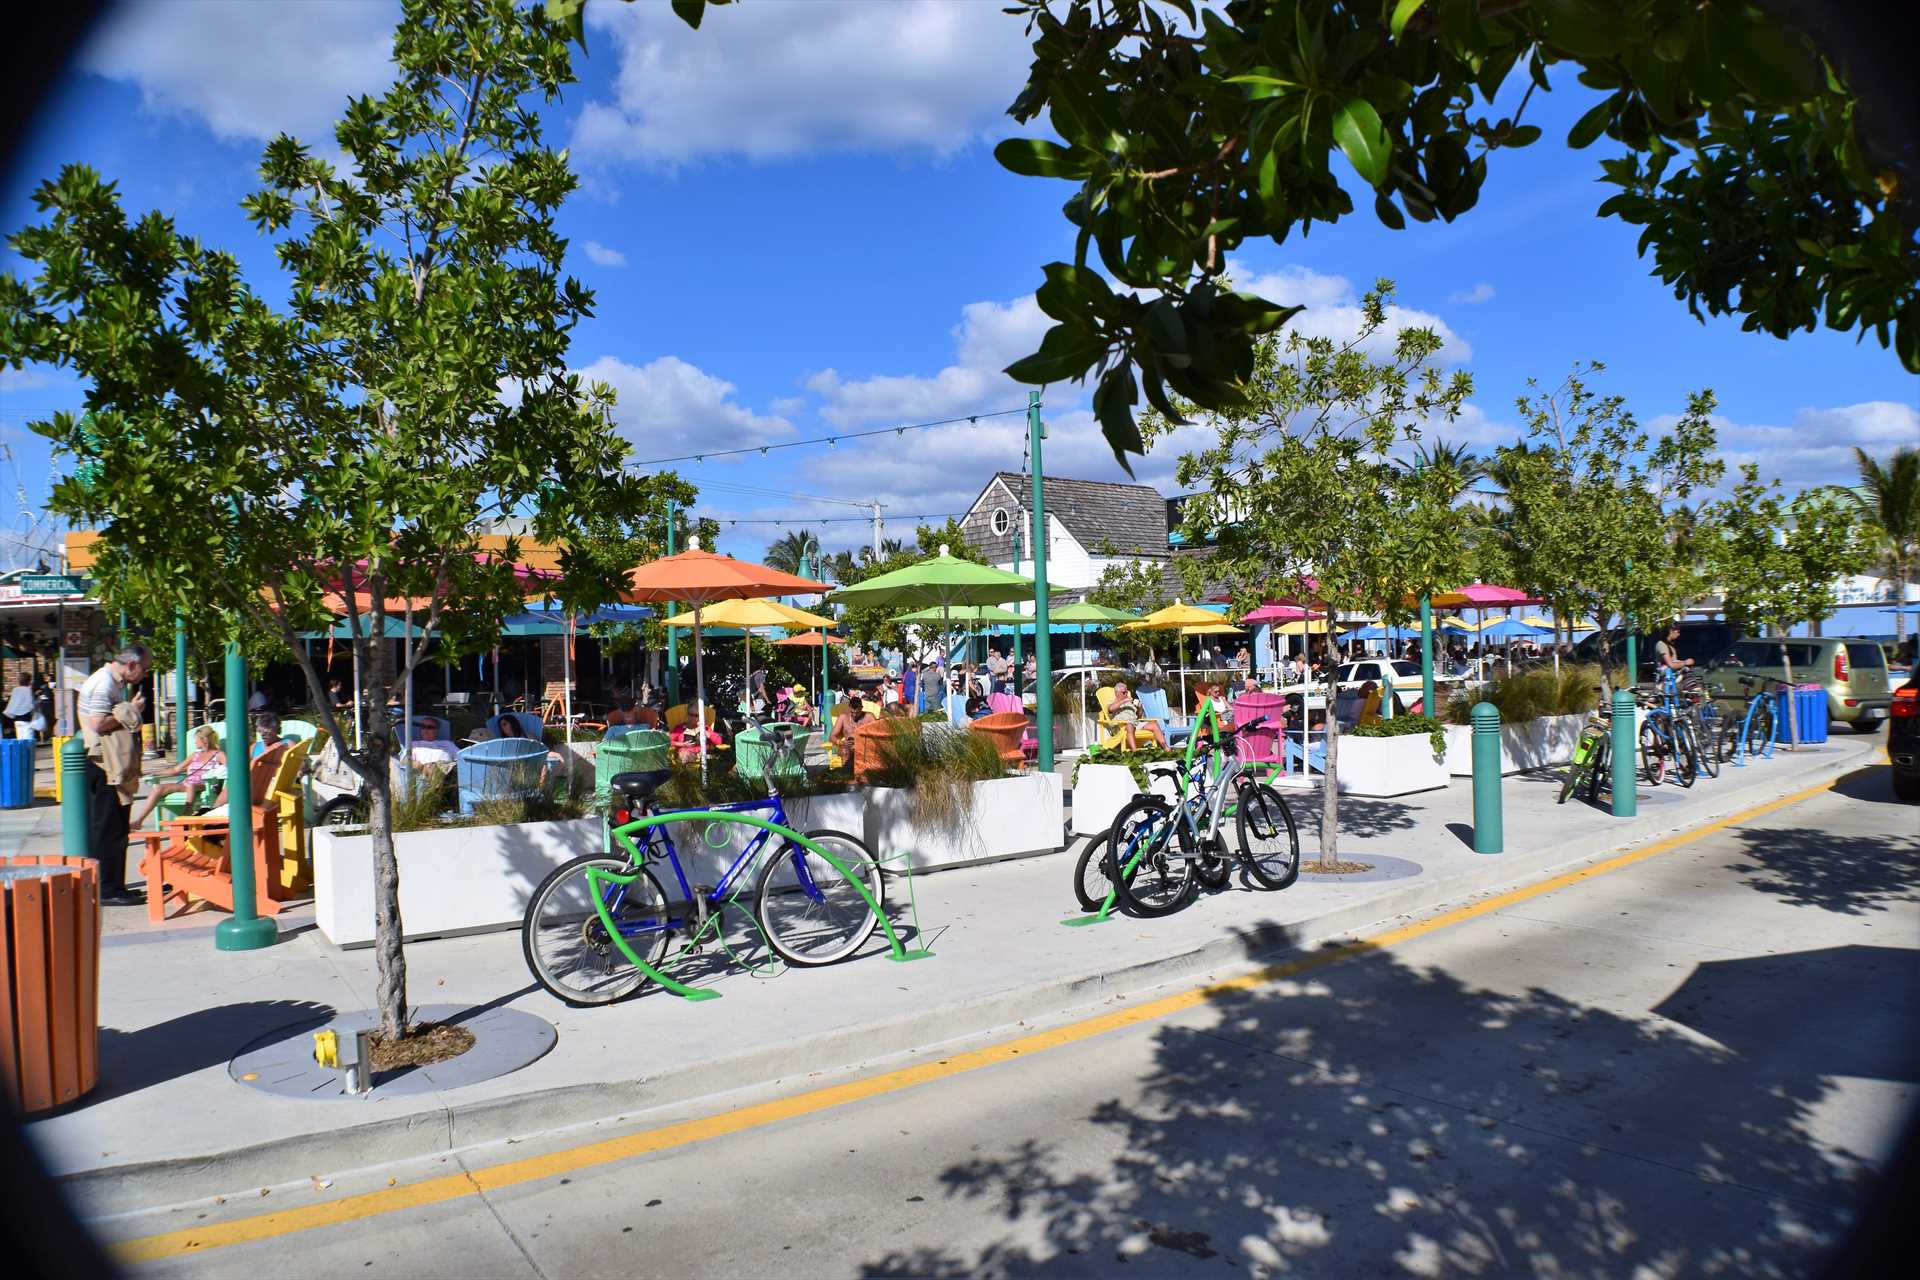 Shops,cafes and restaurants line the main street on your way